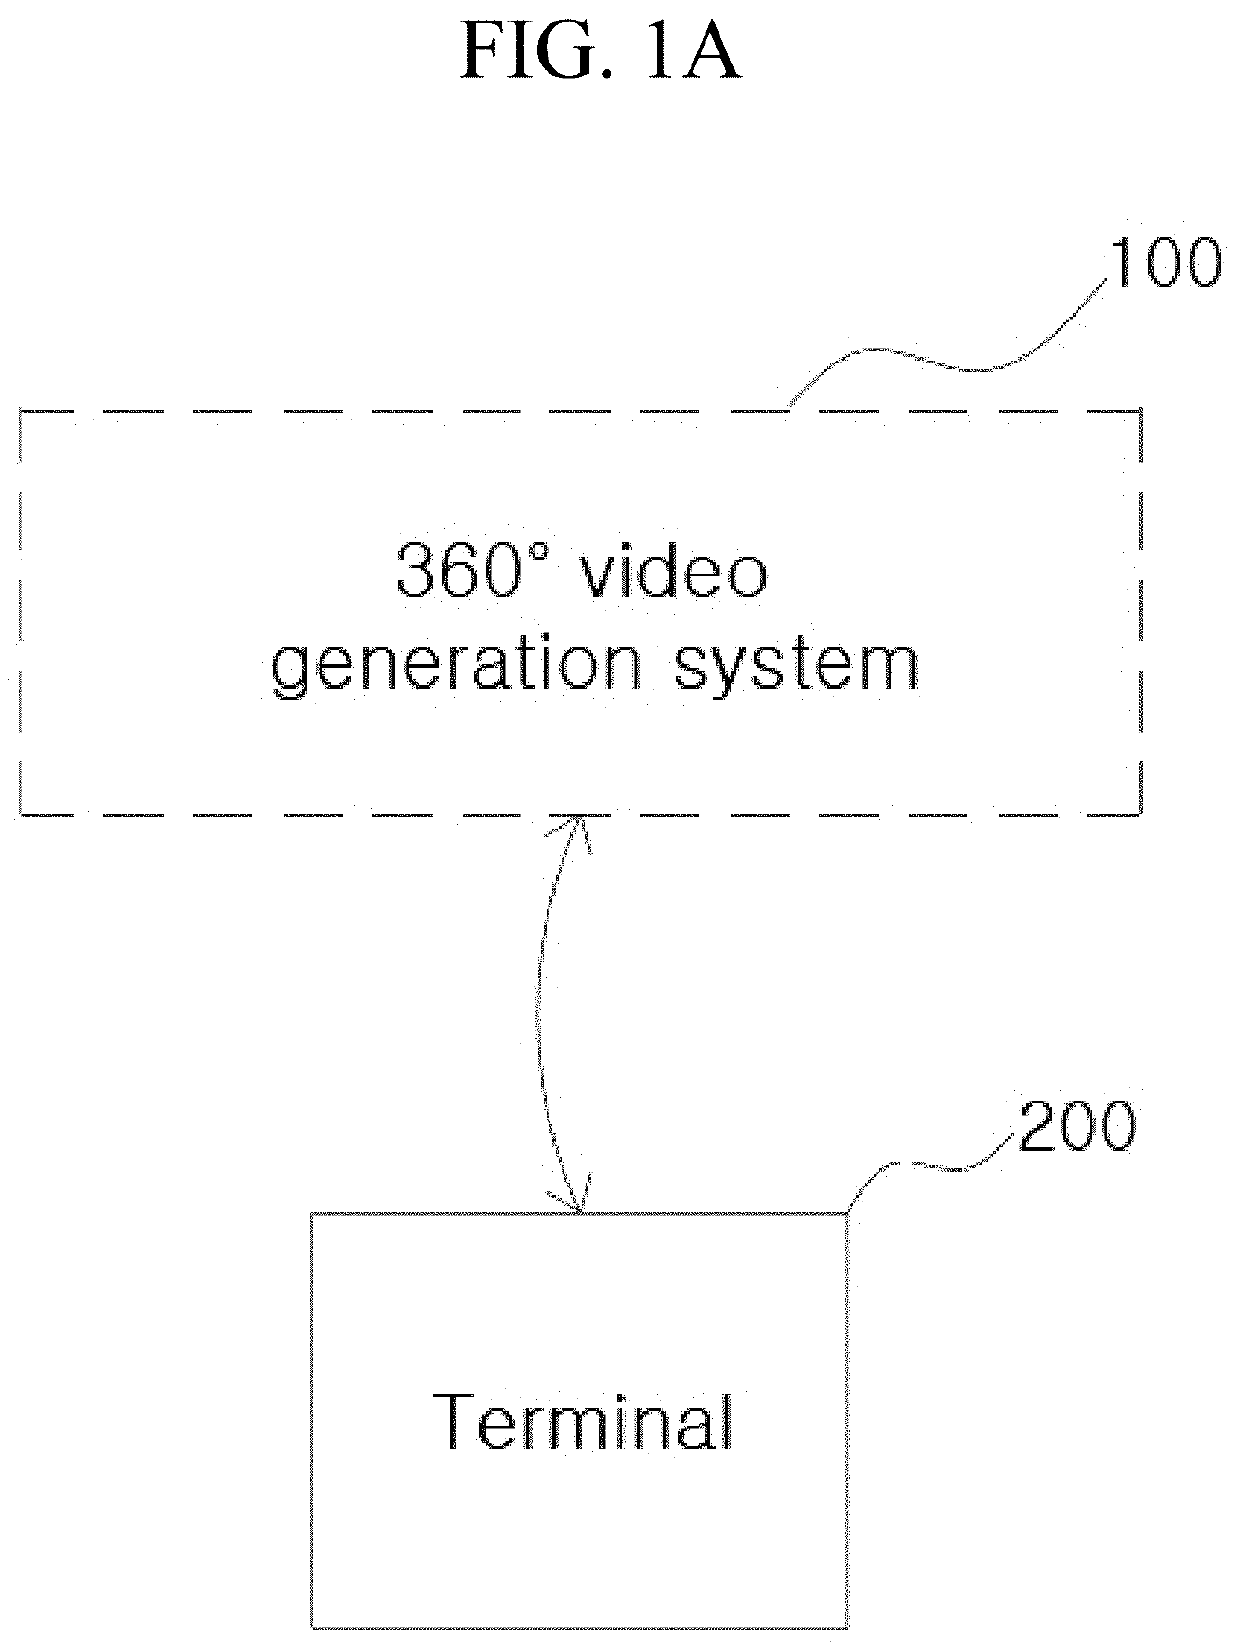 System and method for generating 360° video including advertisement